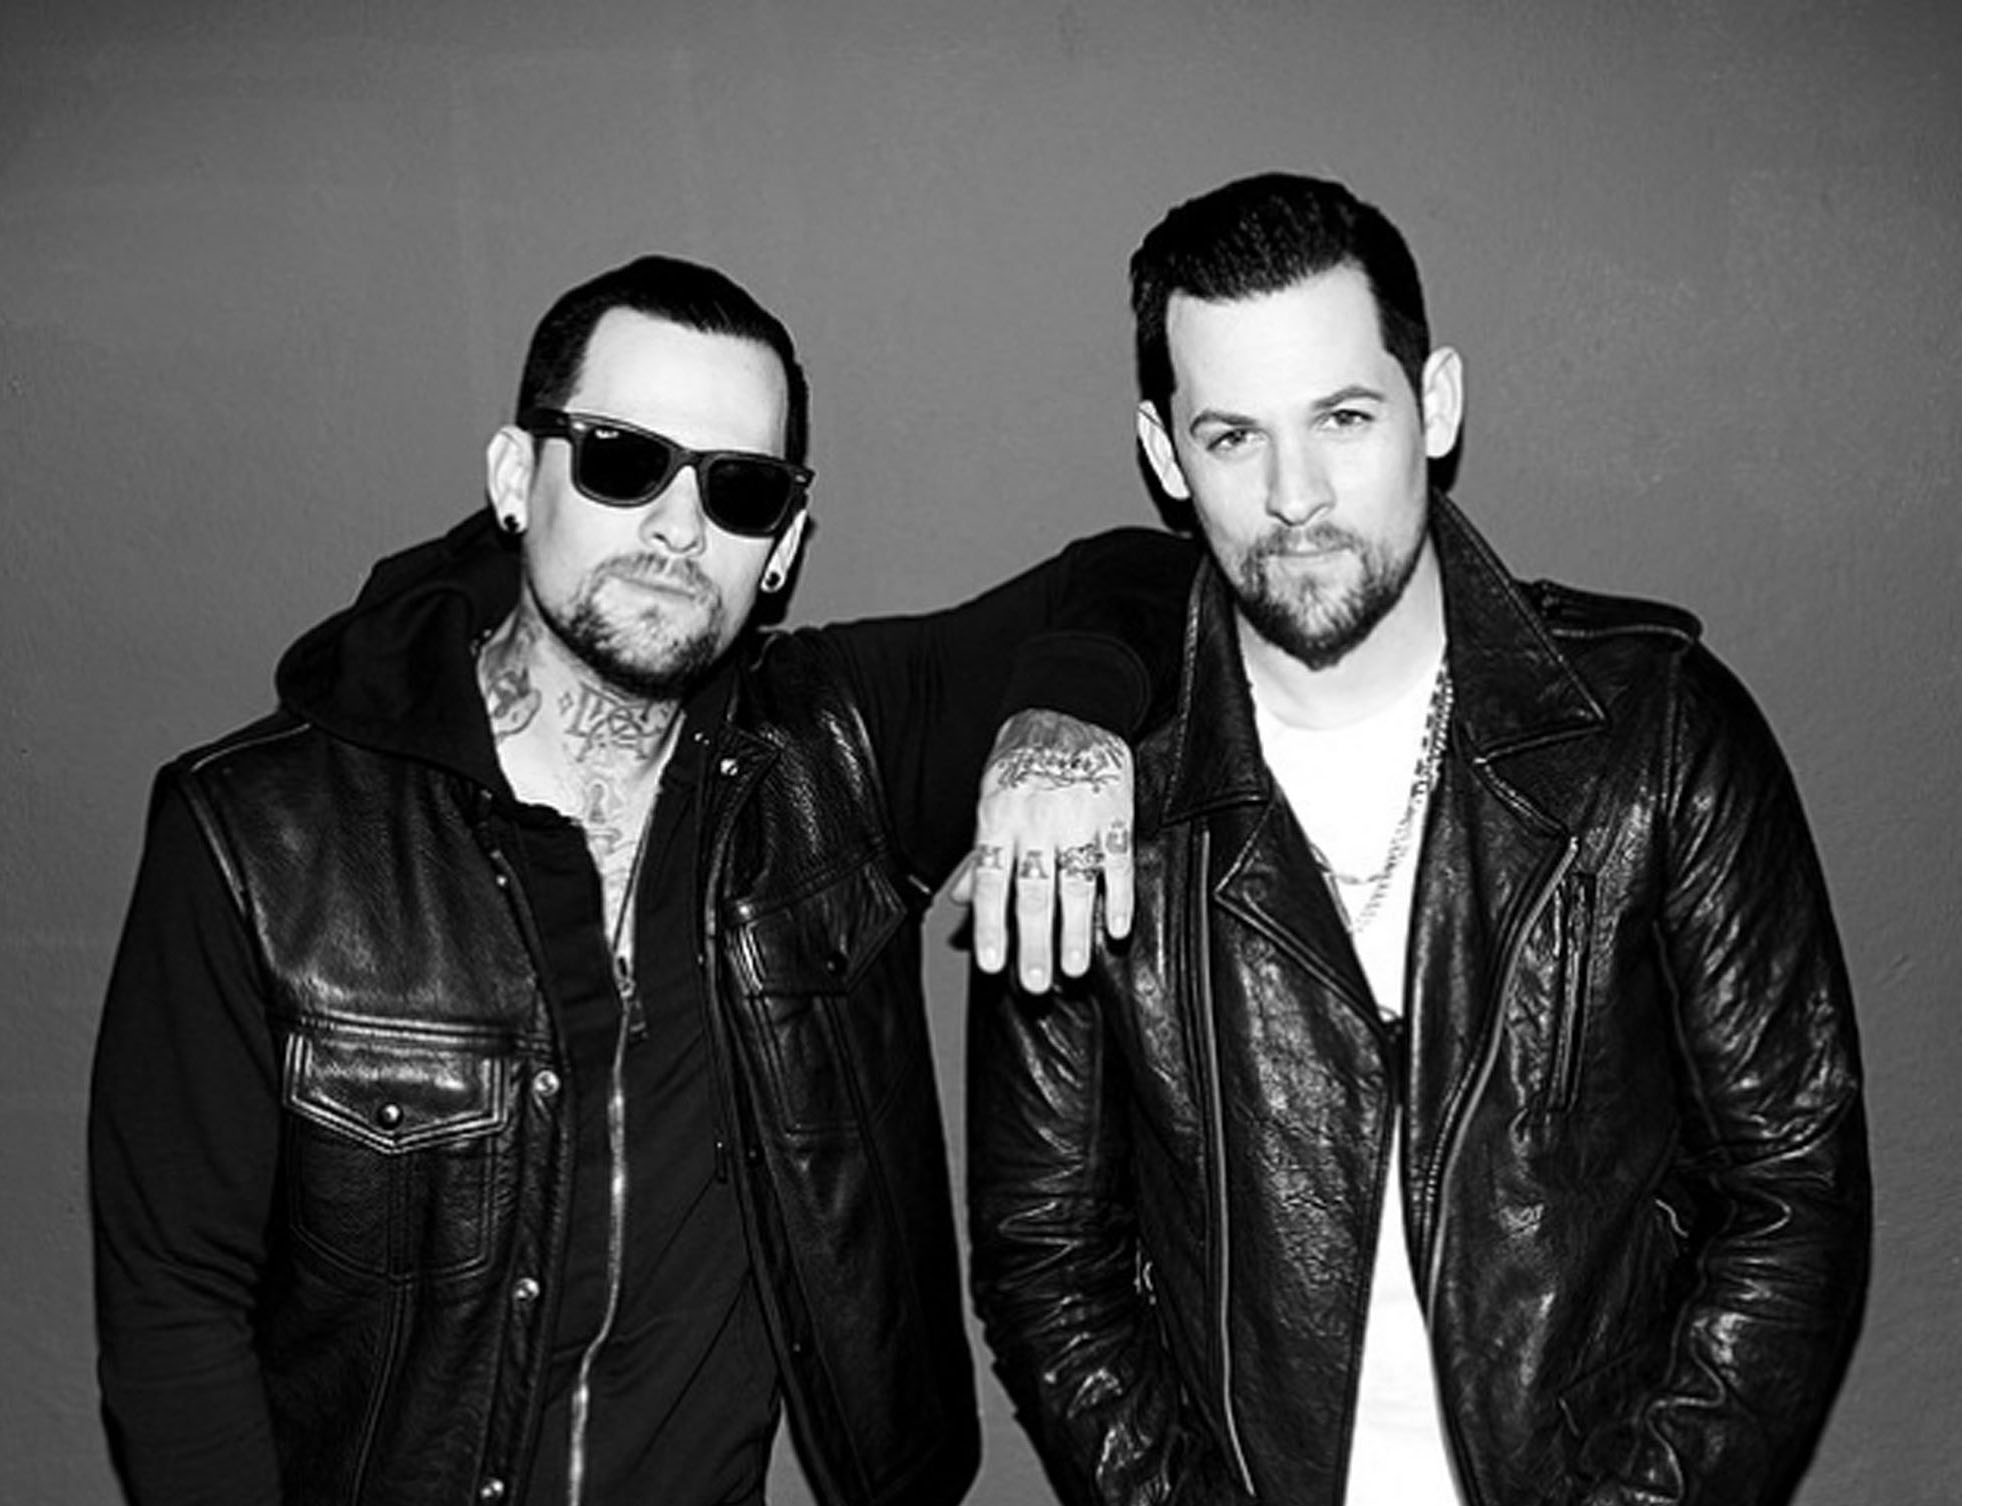 PreOrder The Madden Brothers Debut Album "Greetings From California